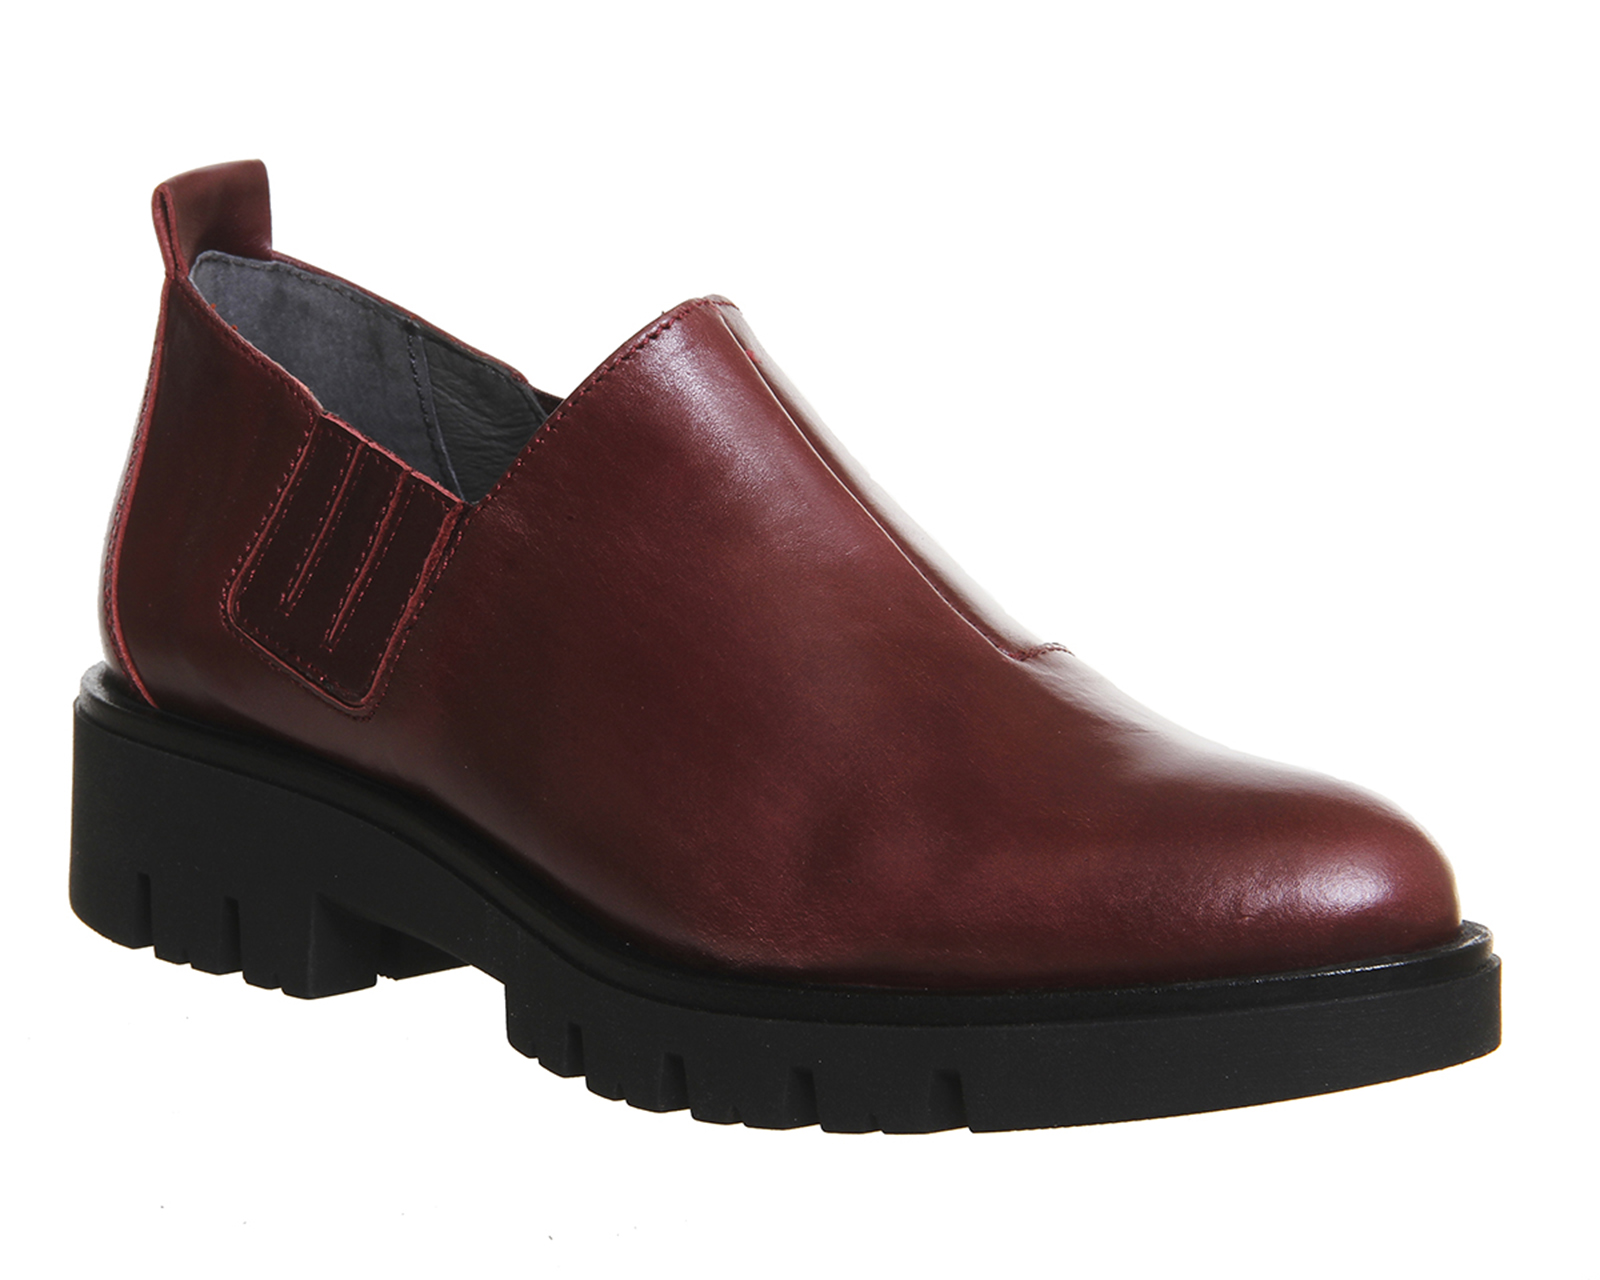 Gaimo for OFFICEMia Slip On ShoesWine Leather